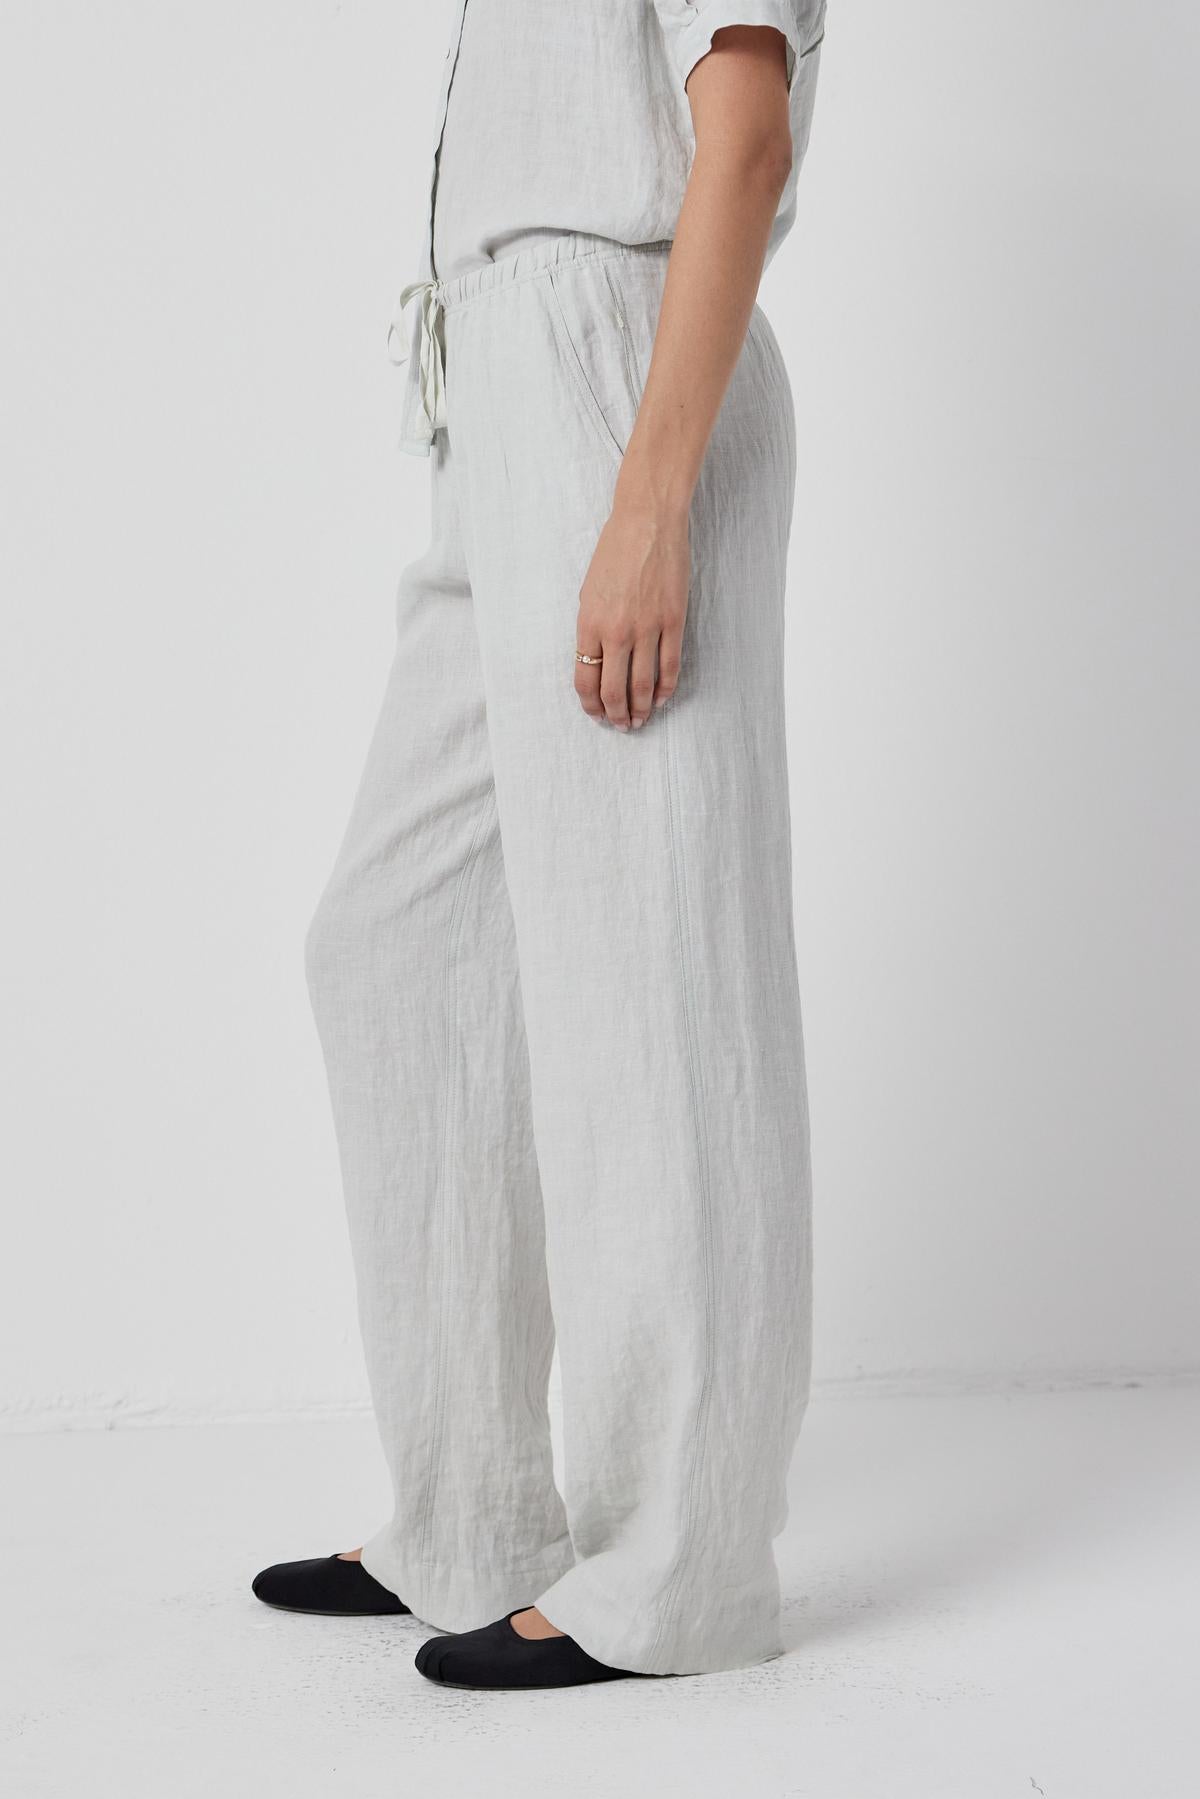 The model is dressed in a relaxed fit white linen PICO PANT jumpsuit with elastic waist by Velvet by Jenny Graham.-36168821309633